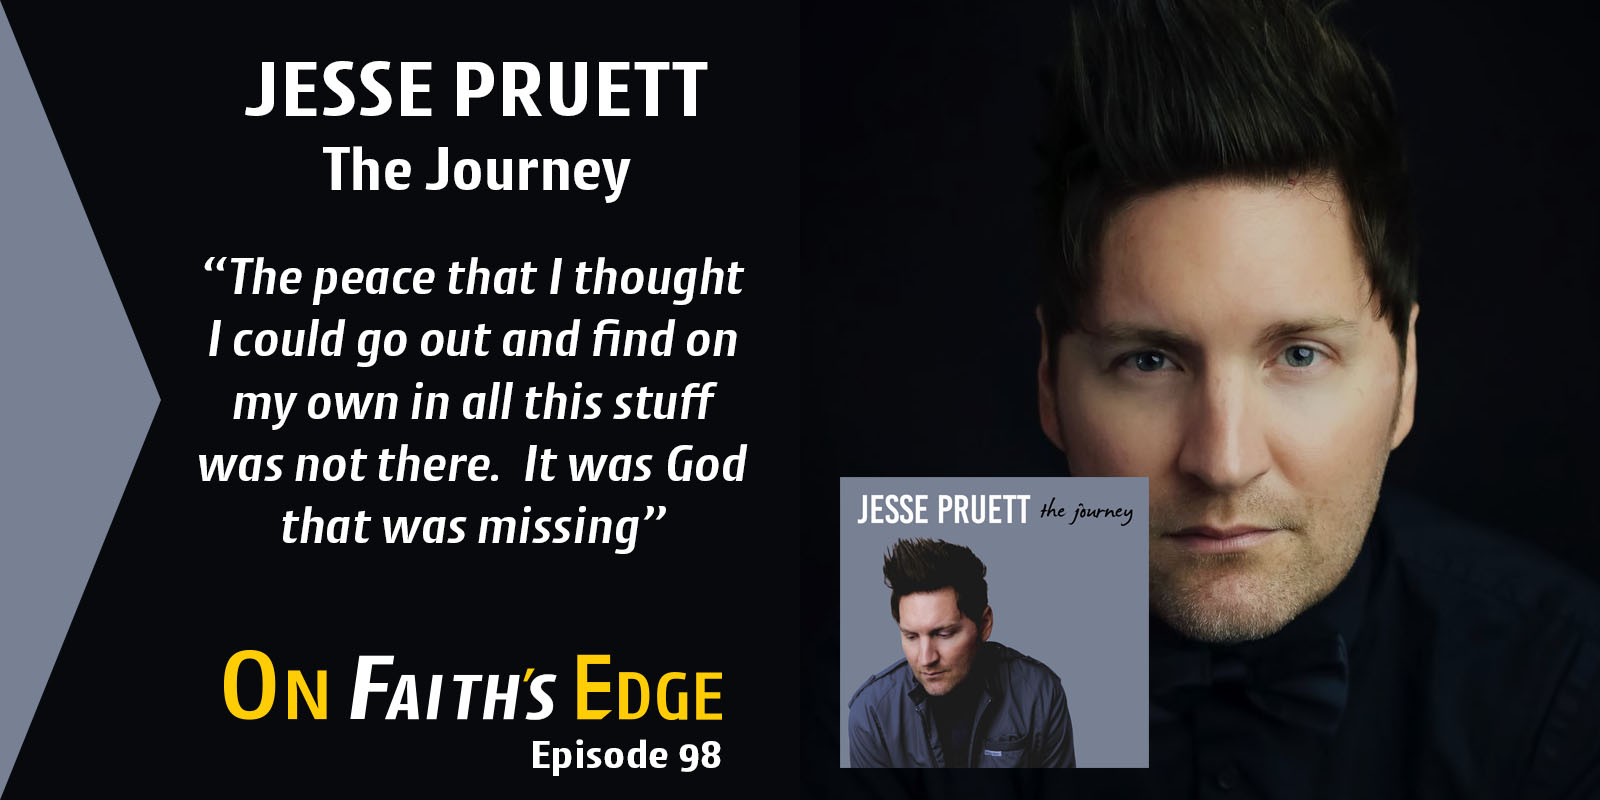 Impacting the World with Music, Movies, and Worship – Singer, Actor Jesse Pruett | Episode 98